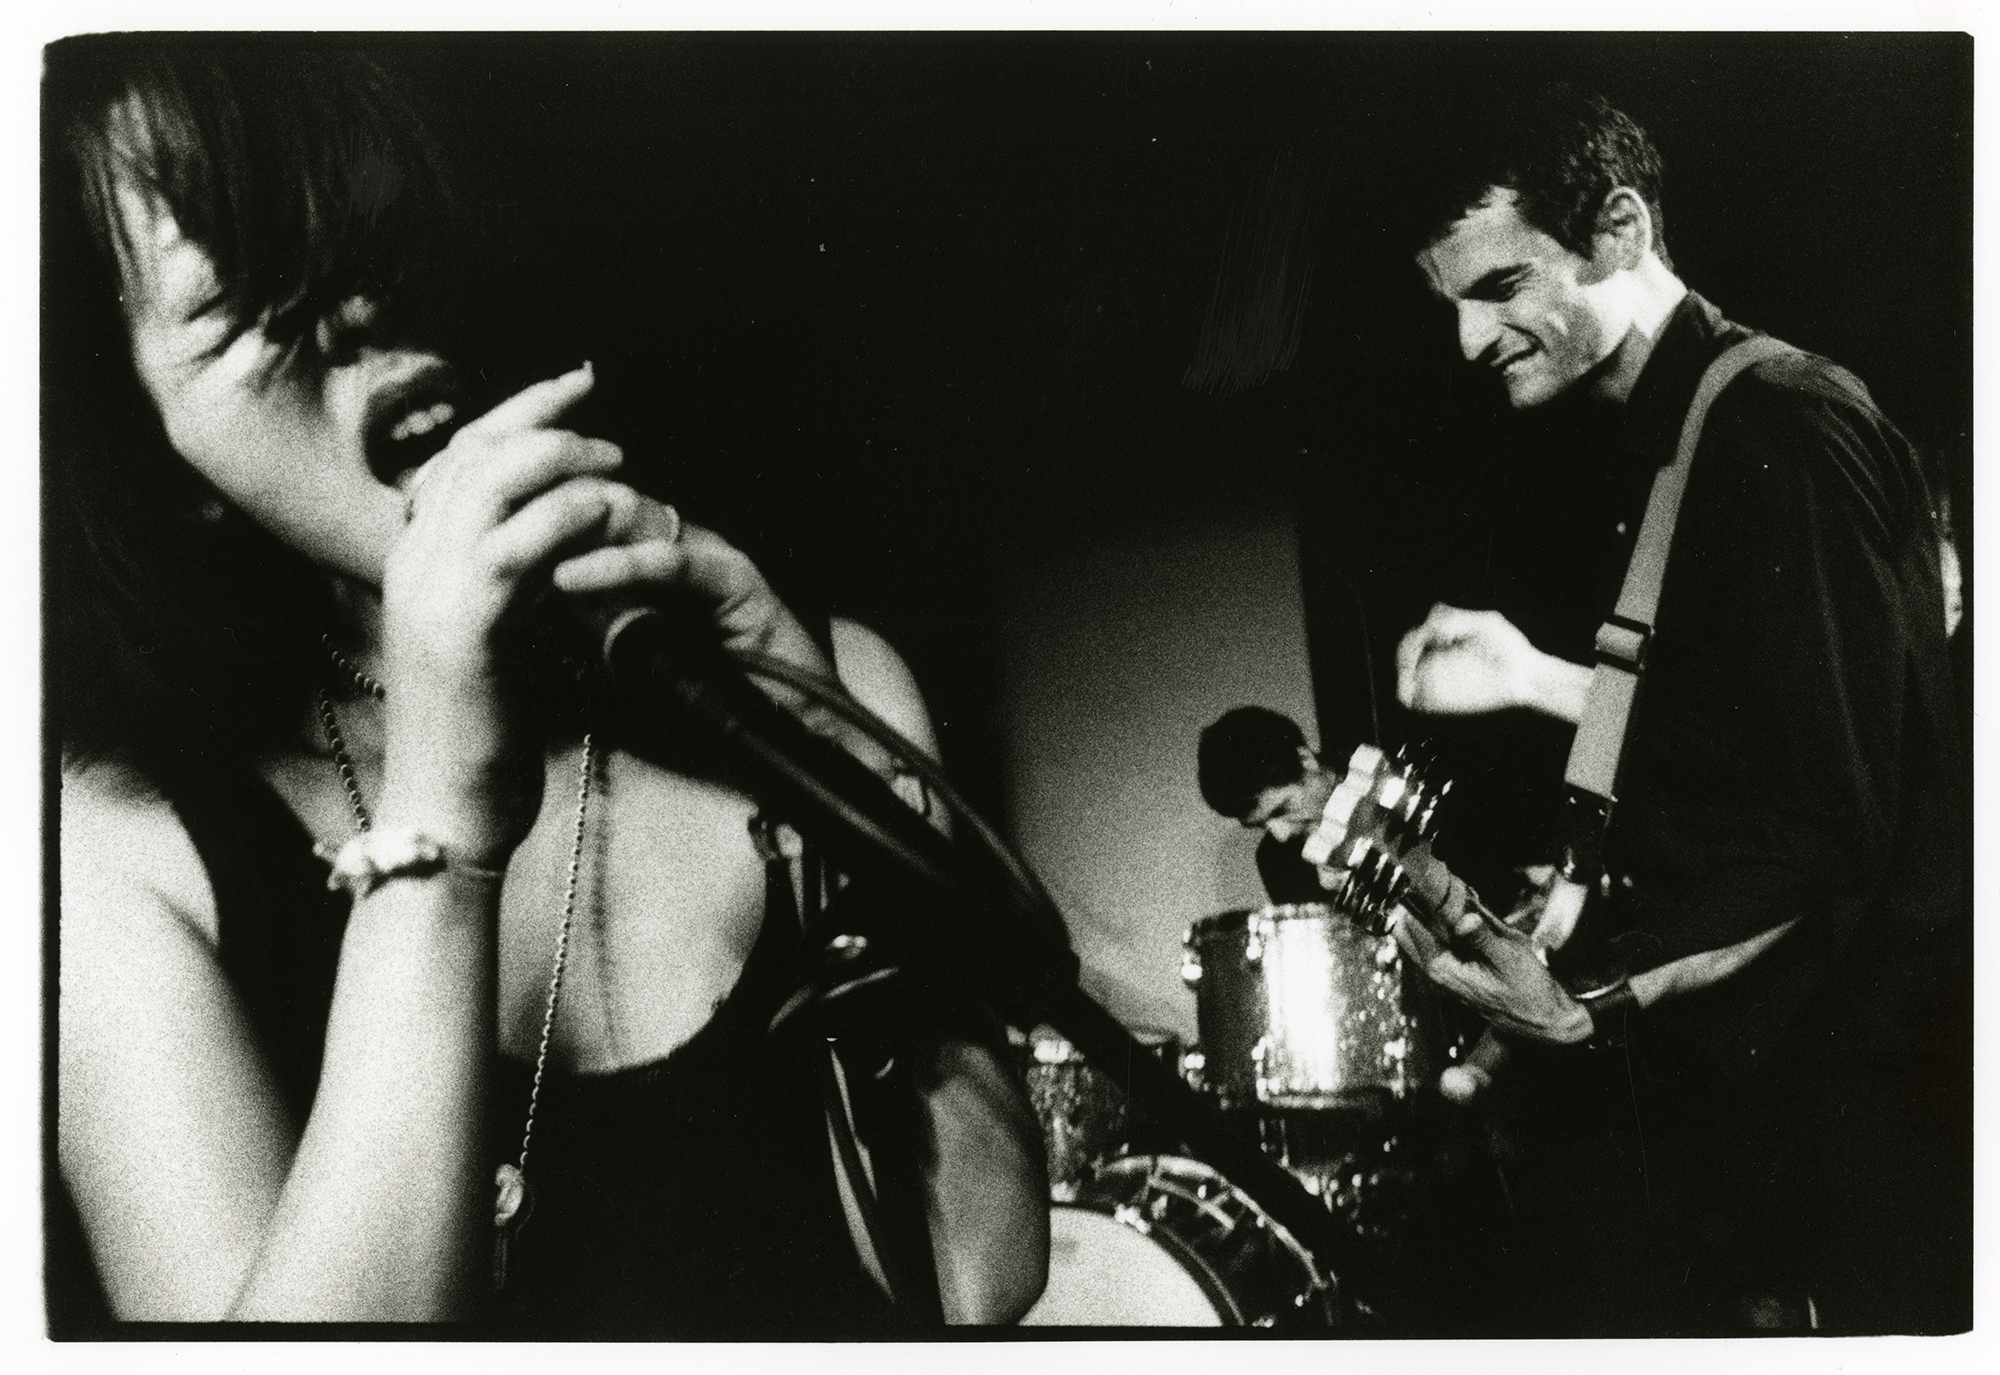 Blonde Redhead announces Numero Group box set collecting early material, shares rare early single “Big Song”